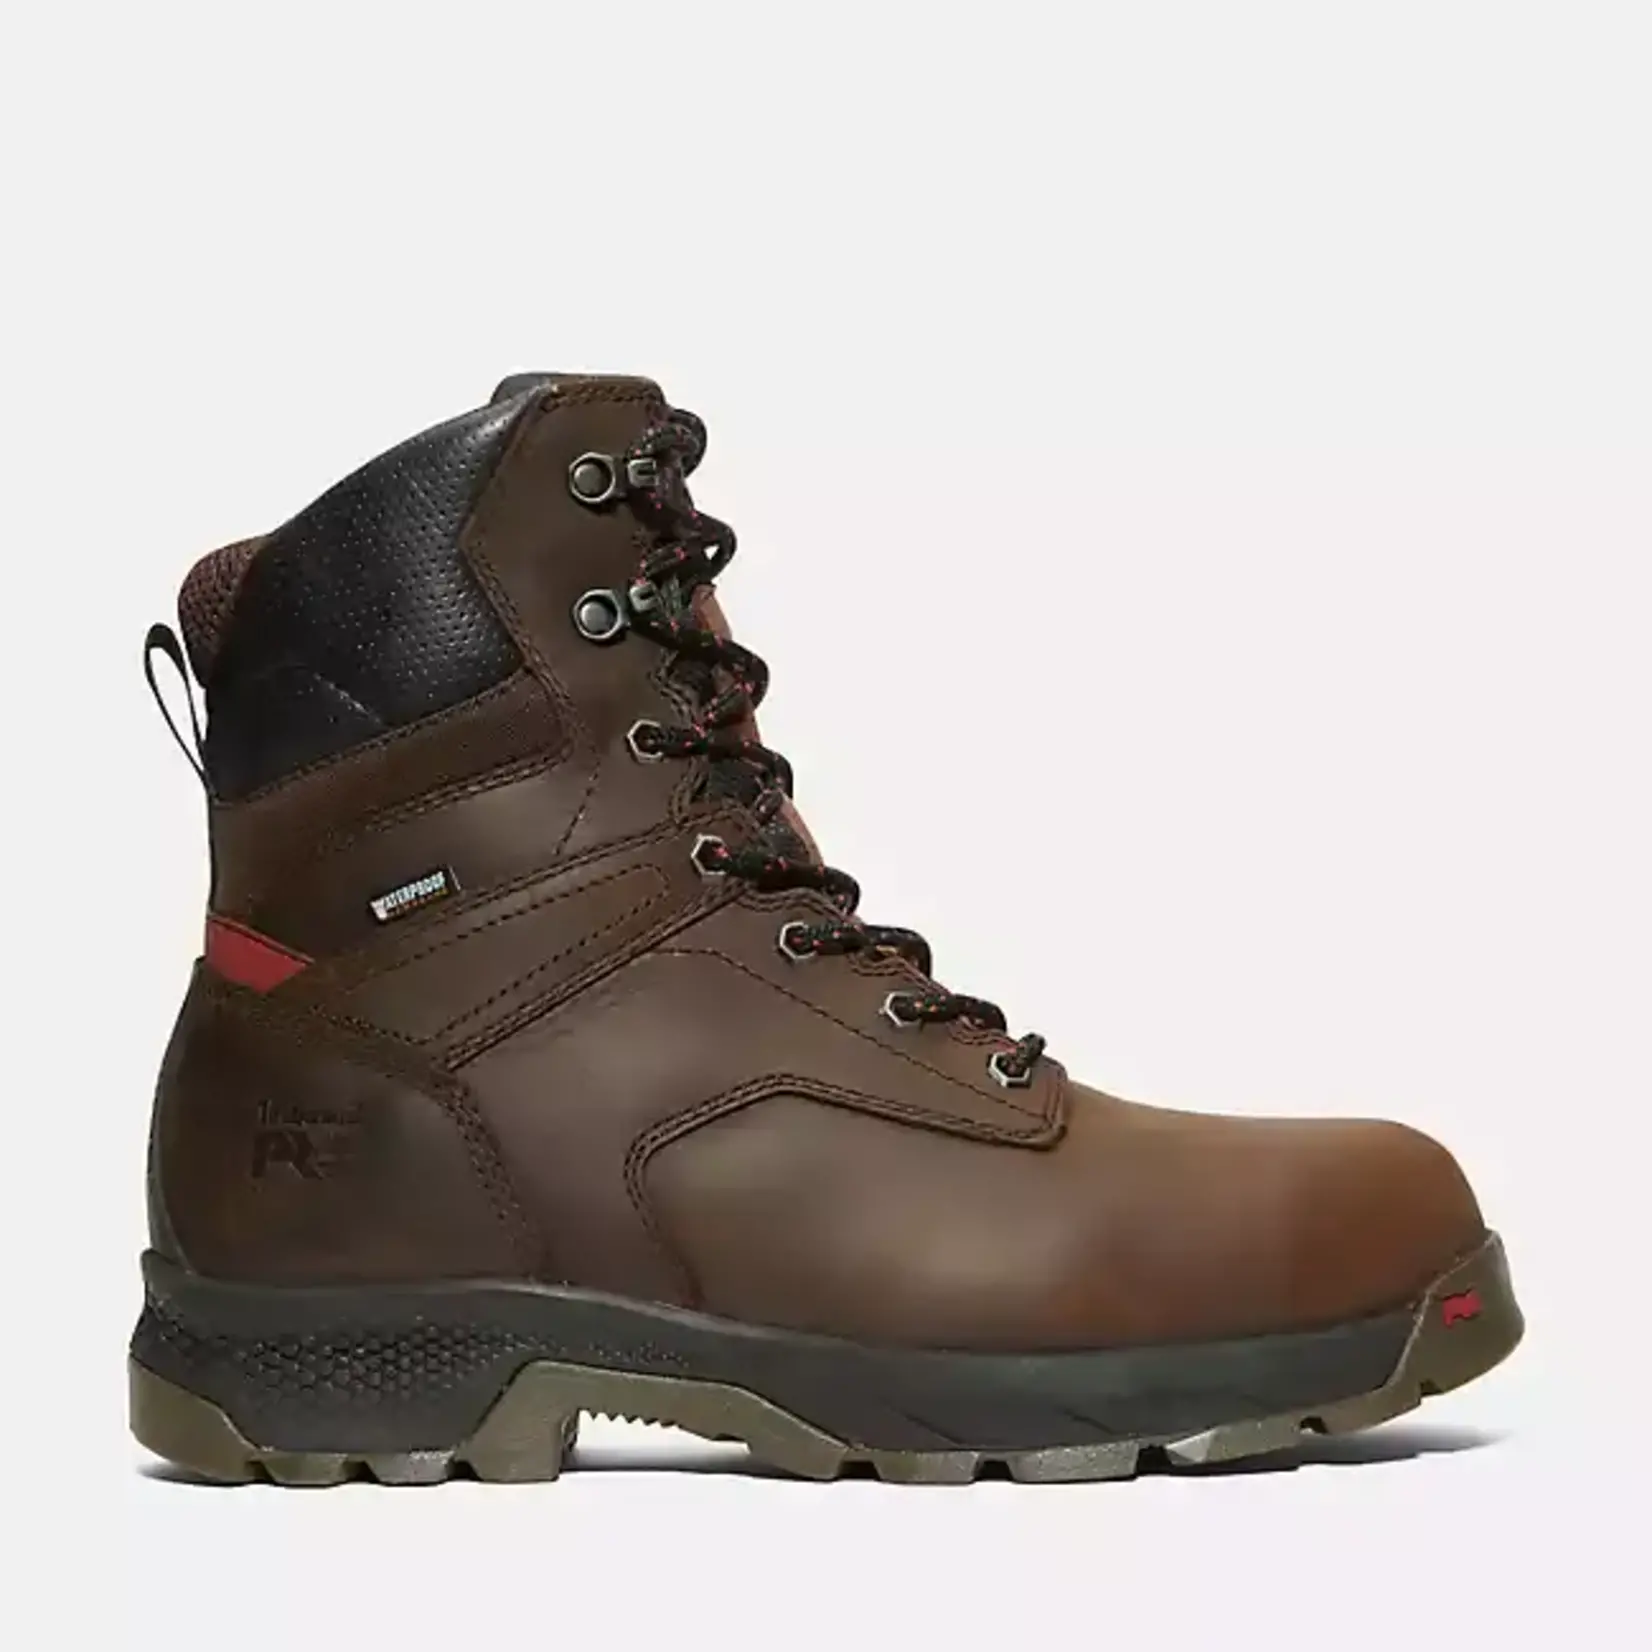 Timberland Timberland Titan EV 8" WP A5U4Y Men's Safety Toe Boots